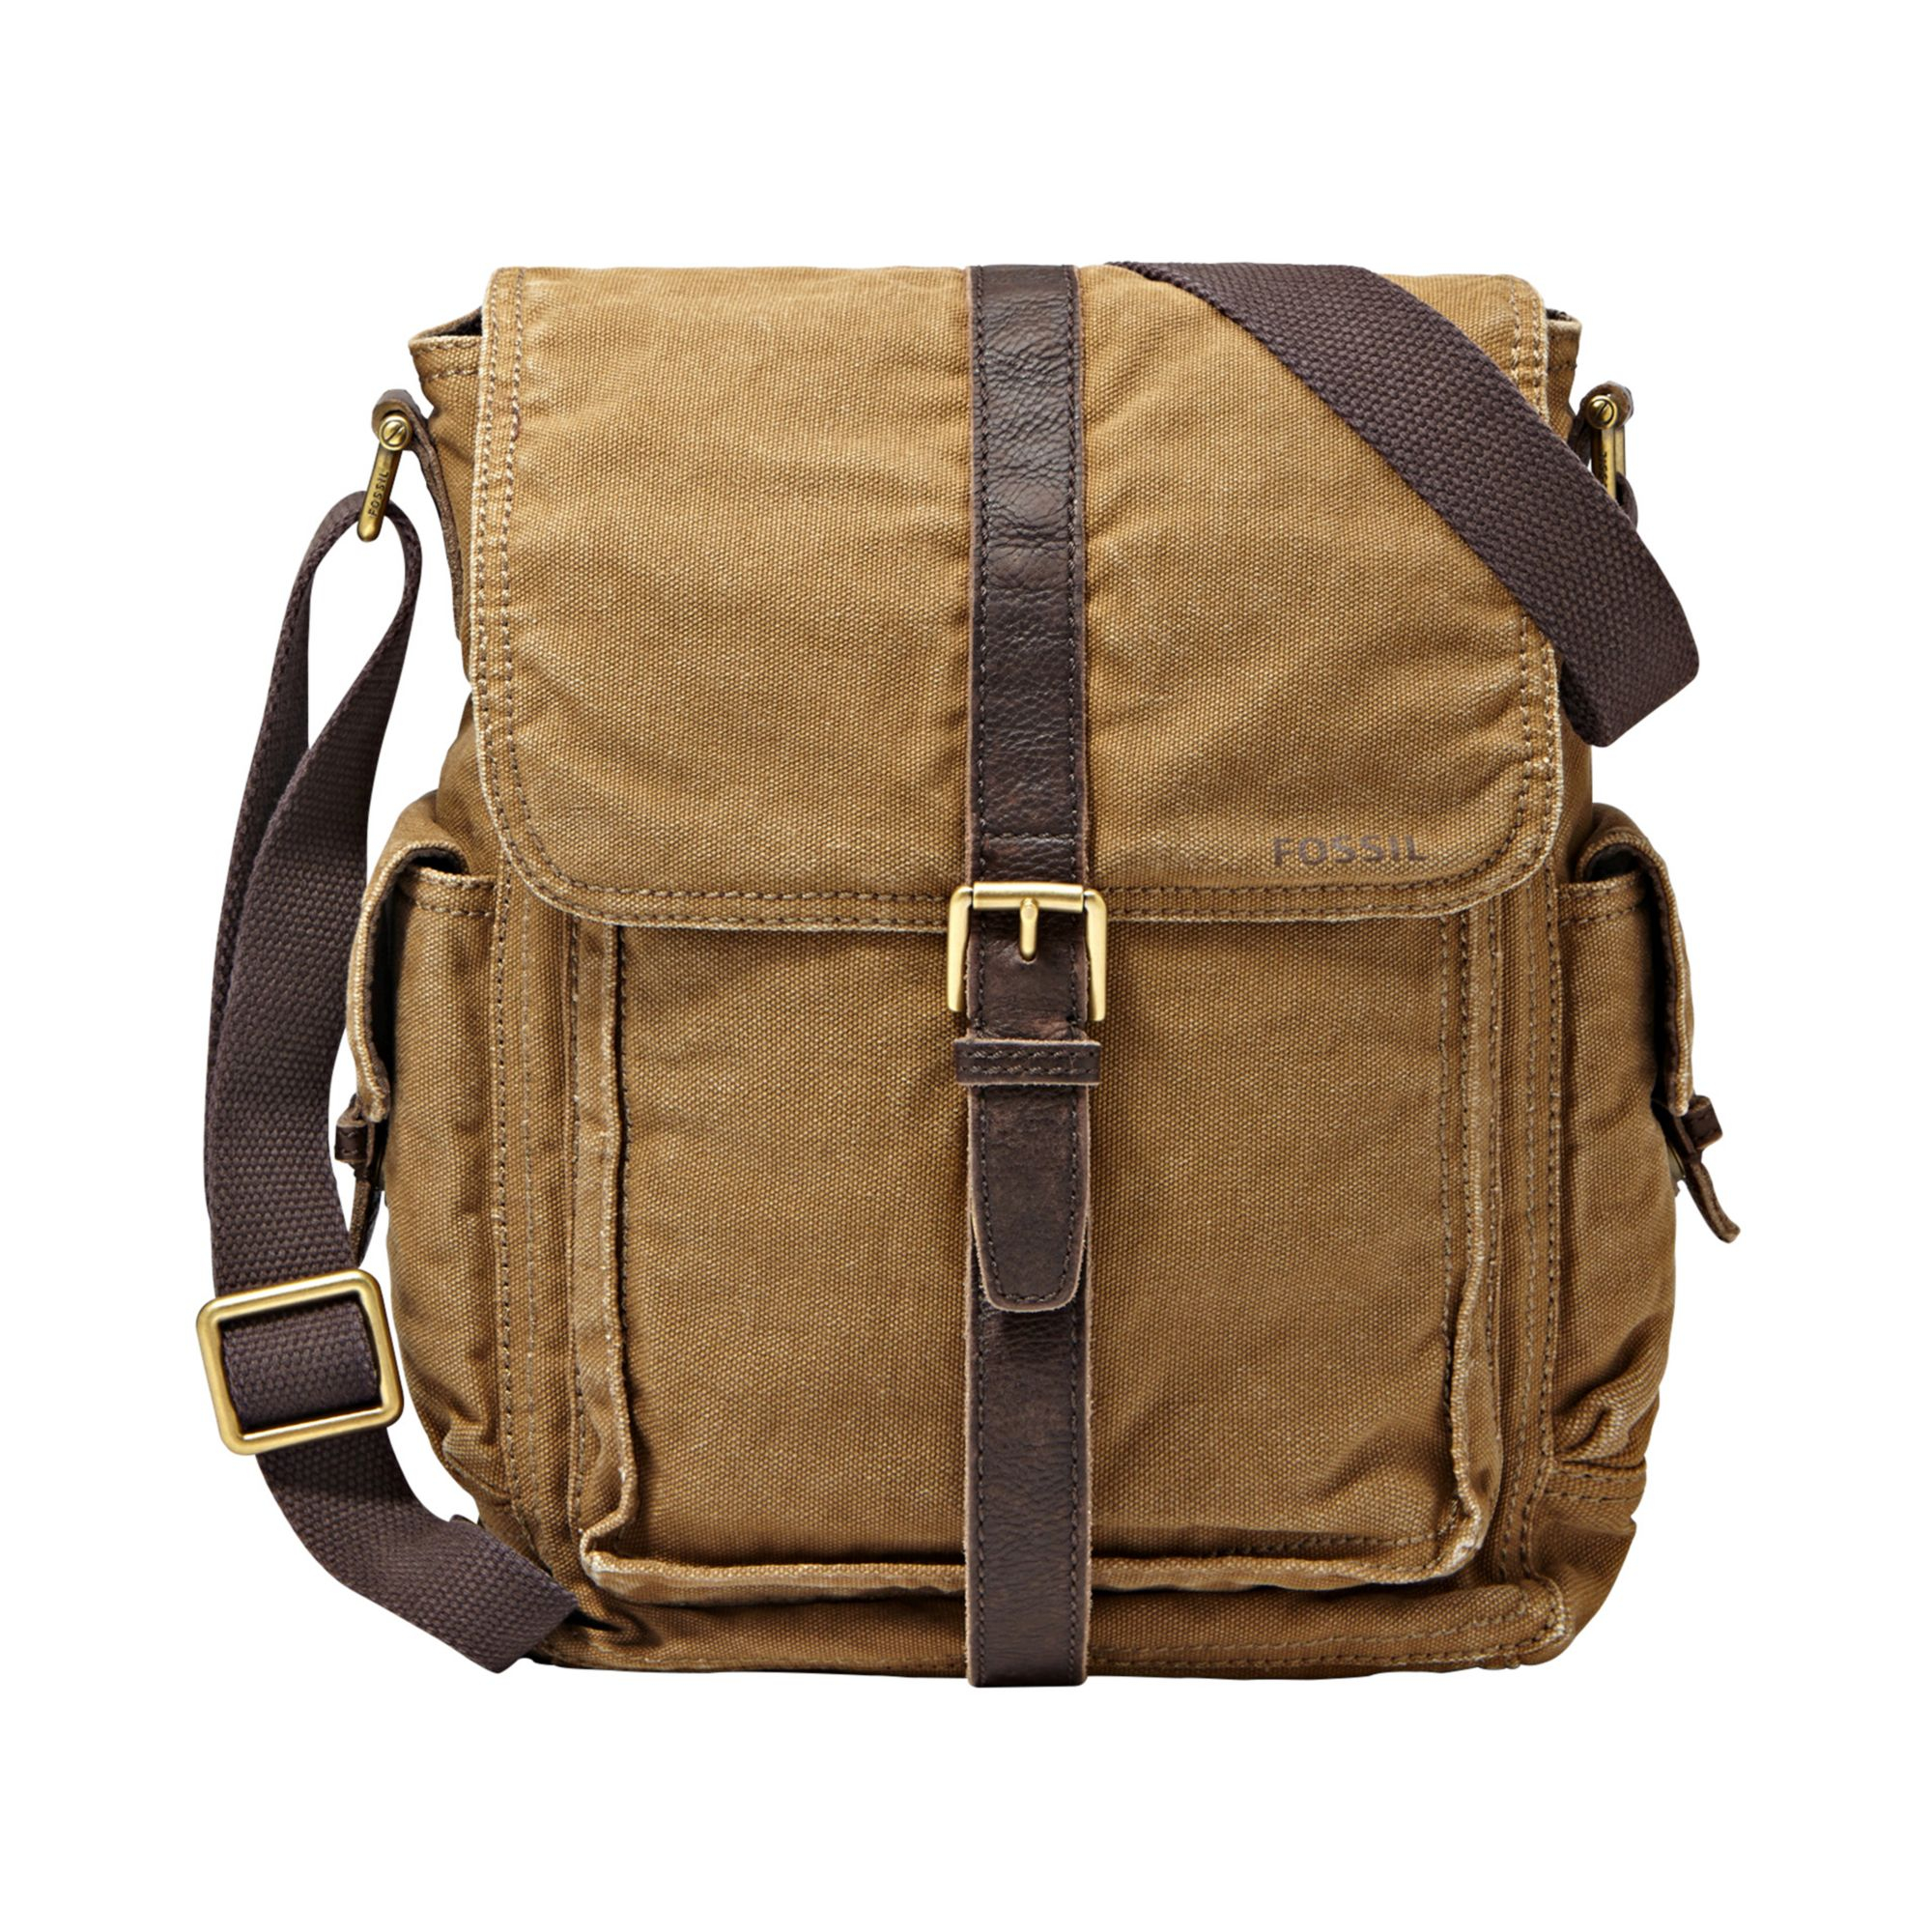 Lyst - Fossil Estate Casual Cotton Canvas North-South Commuter Bag in ...